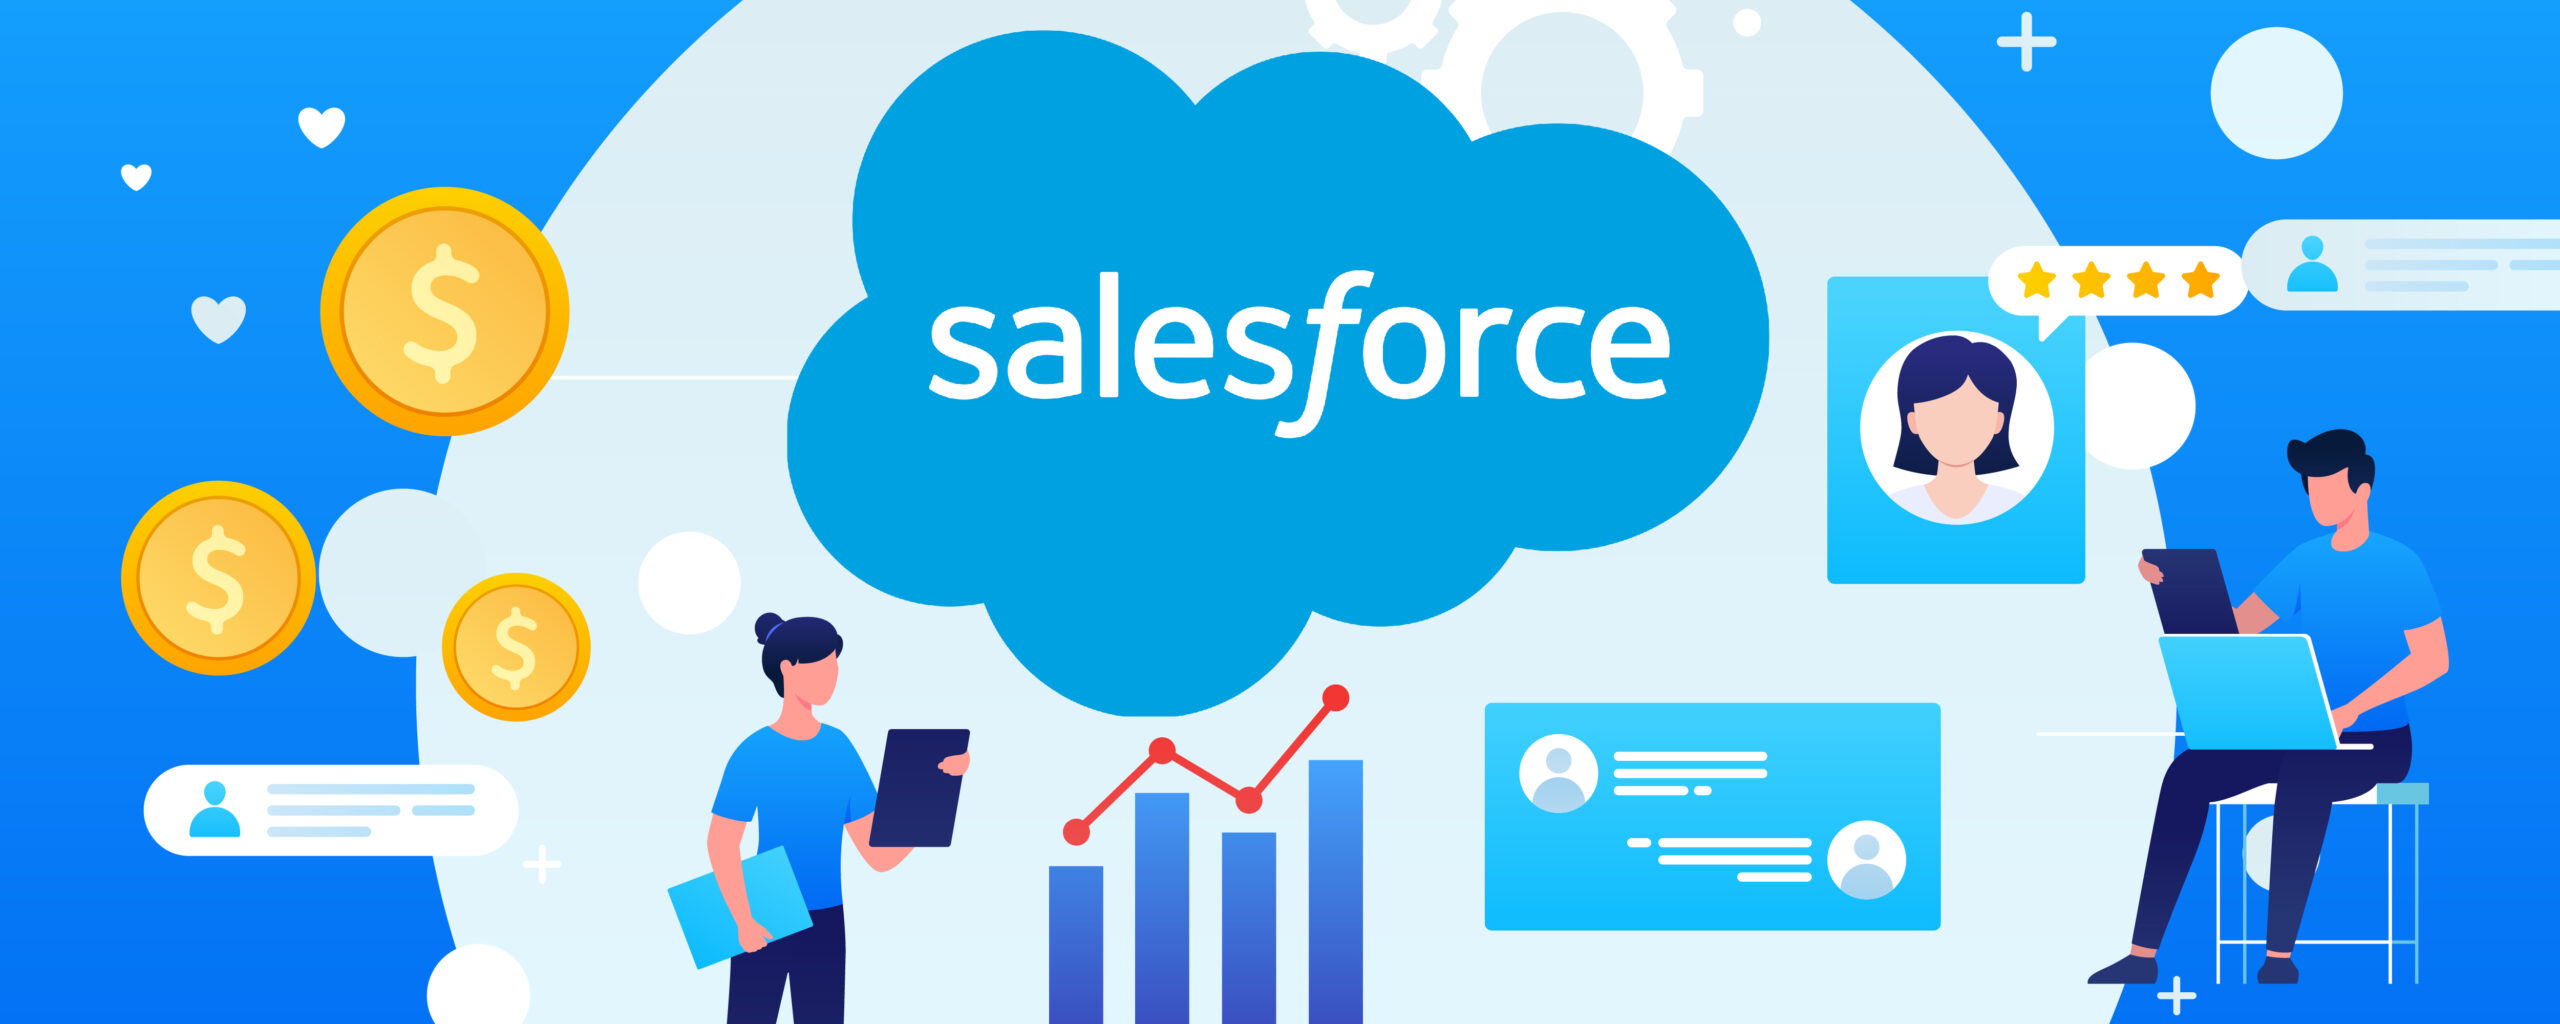 salesforce with people using it